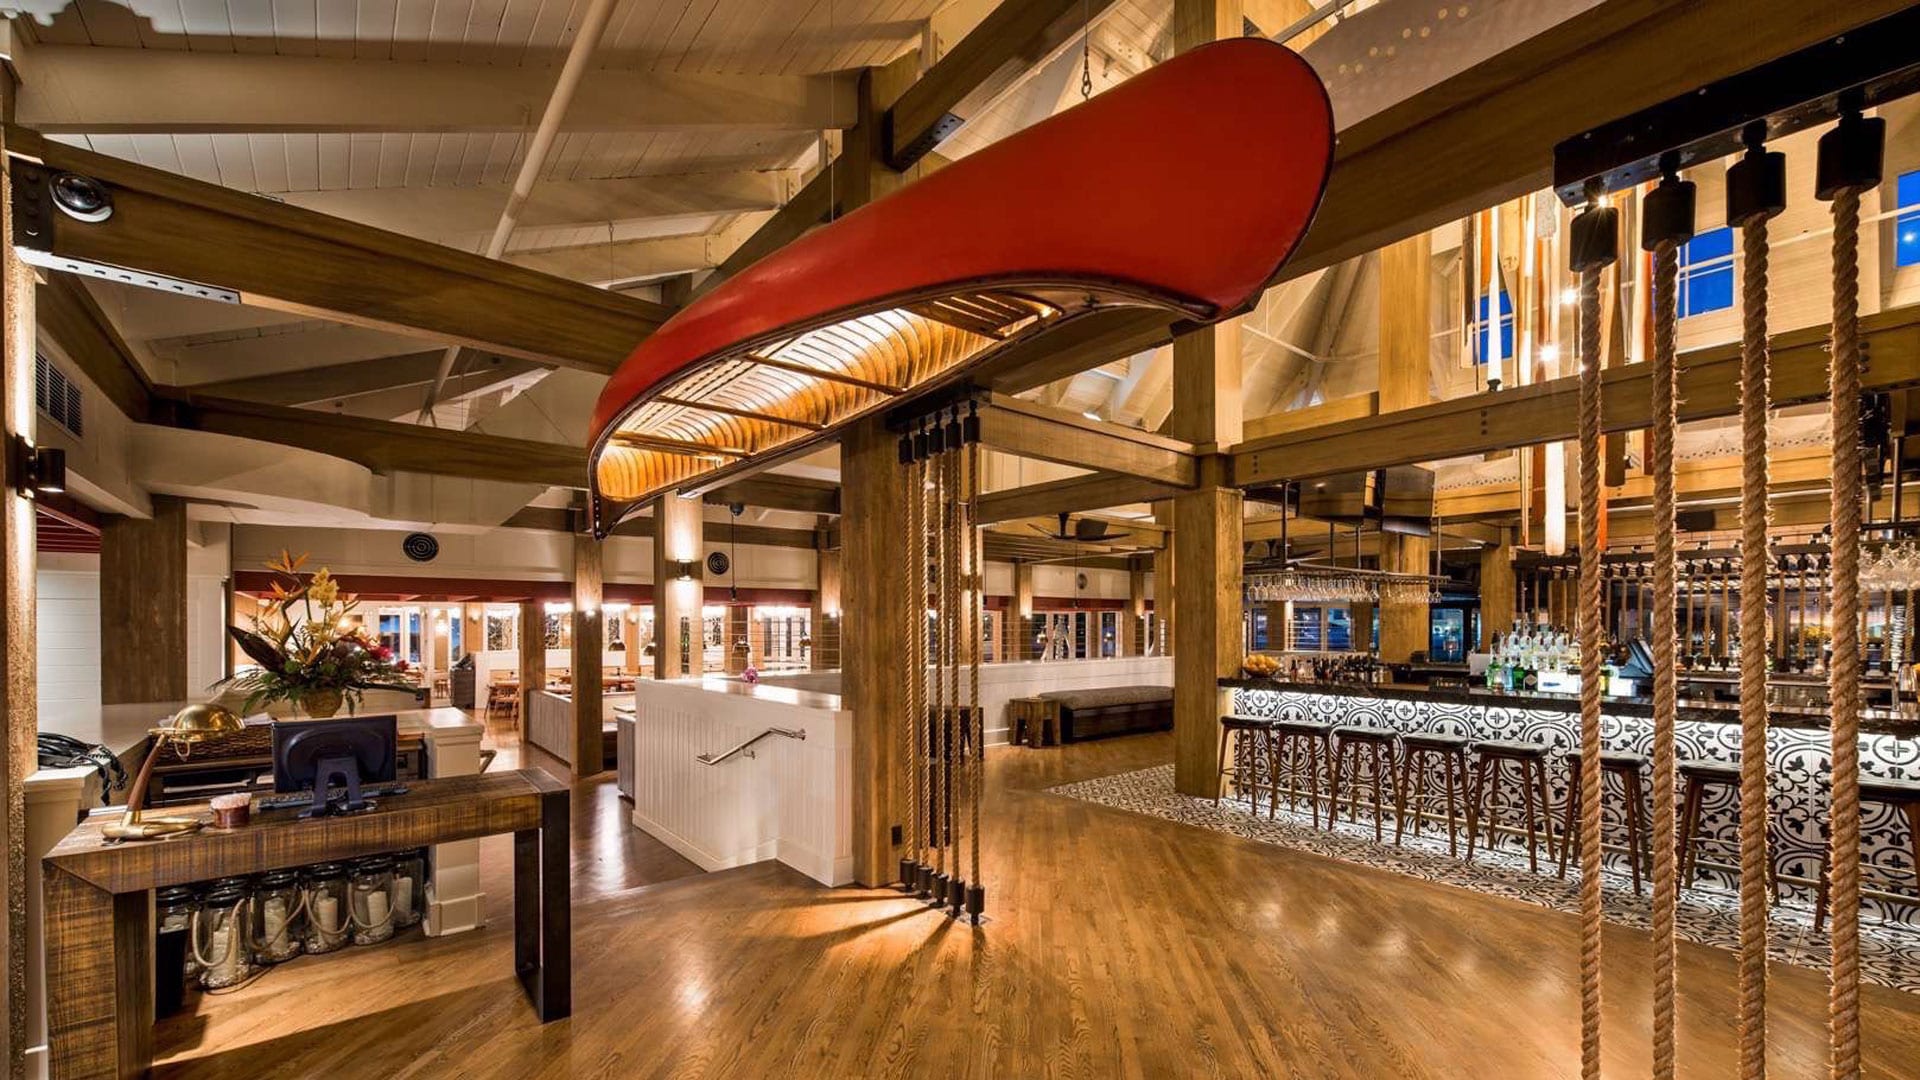 IU C&I Studios Portfolio and Page The Restaurant People View of the inside of a restaurant and bar with a canoe hanging upside down from the ceiling.